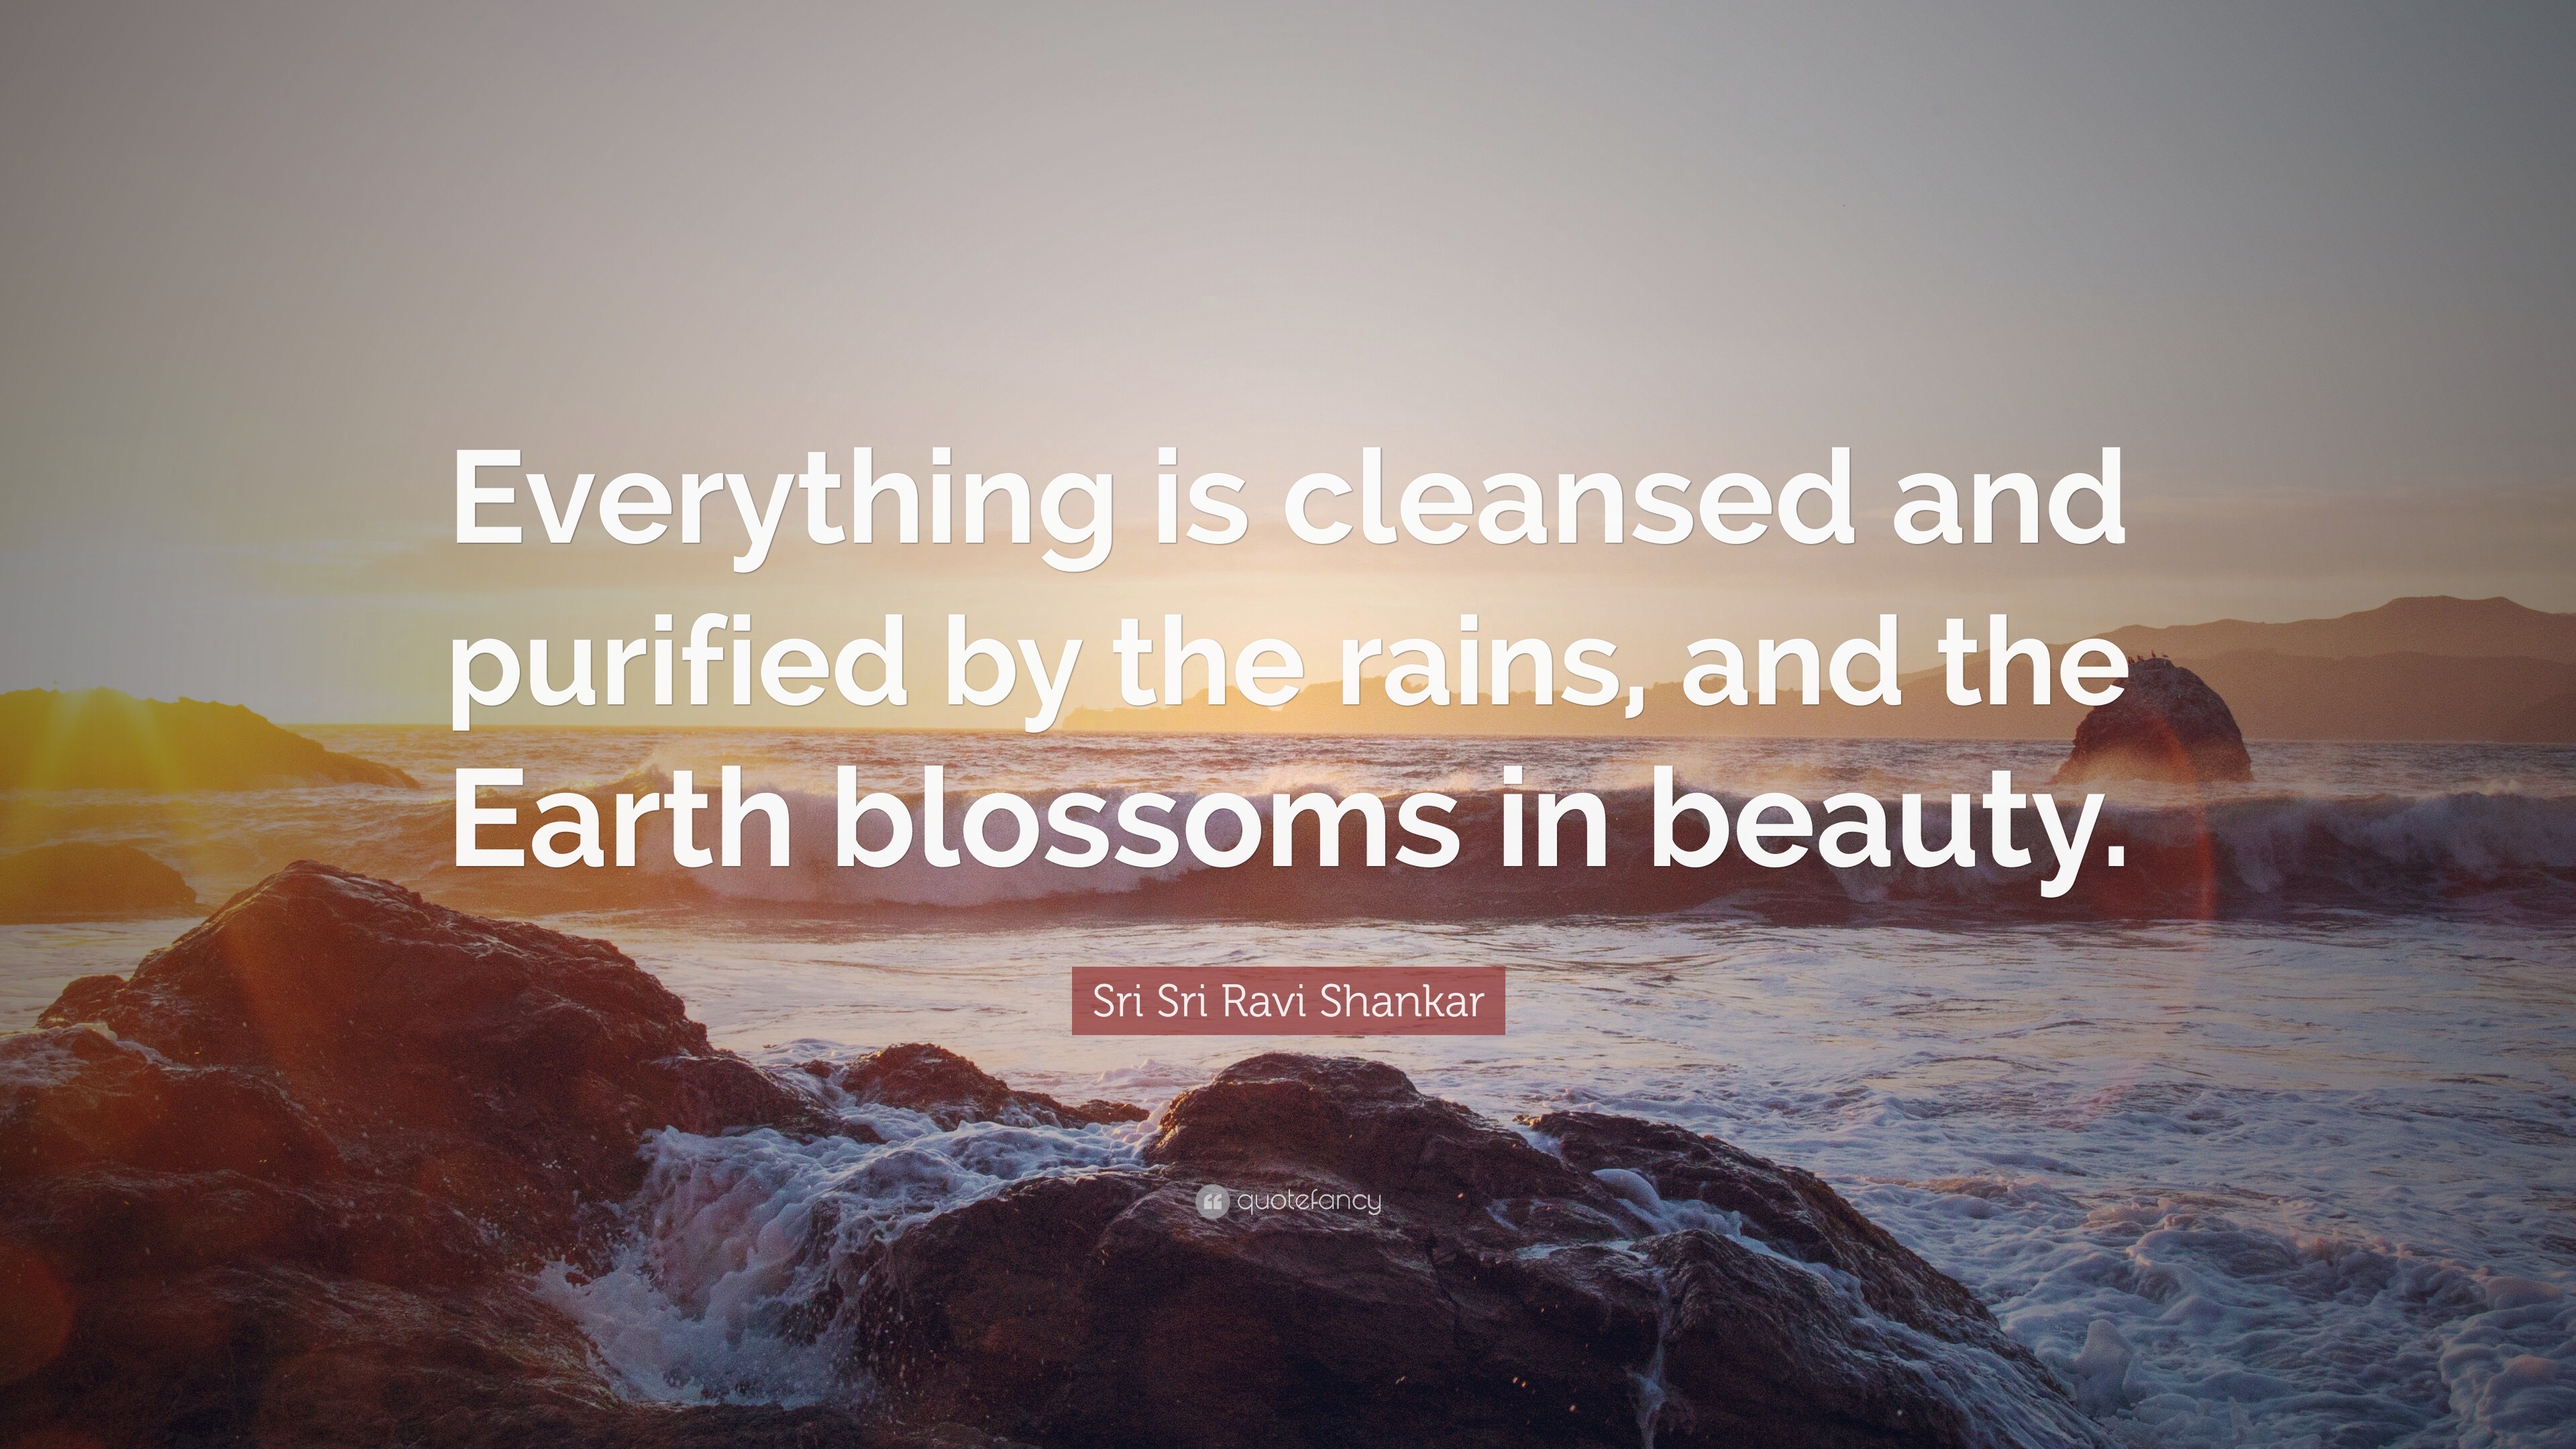 Sri Sri Ravi Shankar Quote: “Everything is cleansed and purified